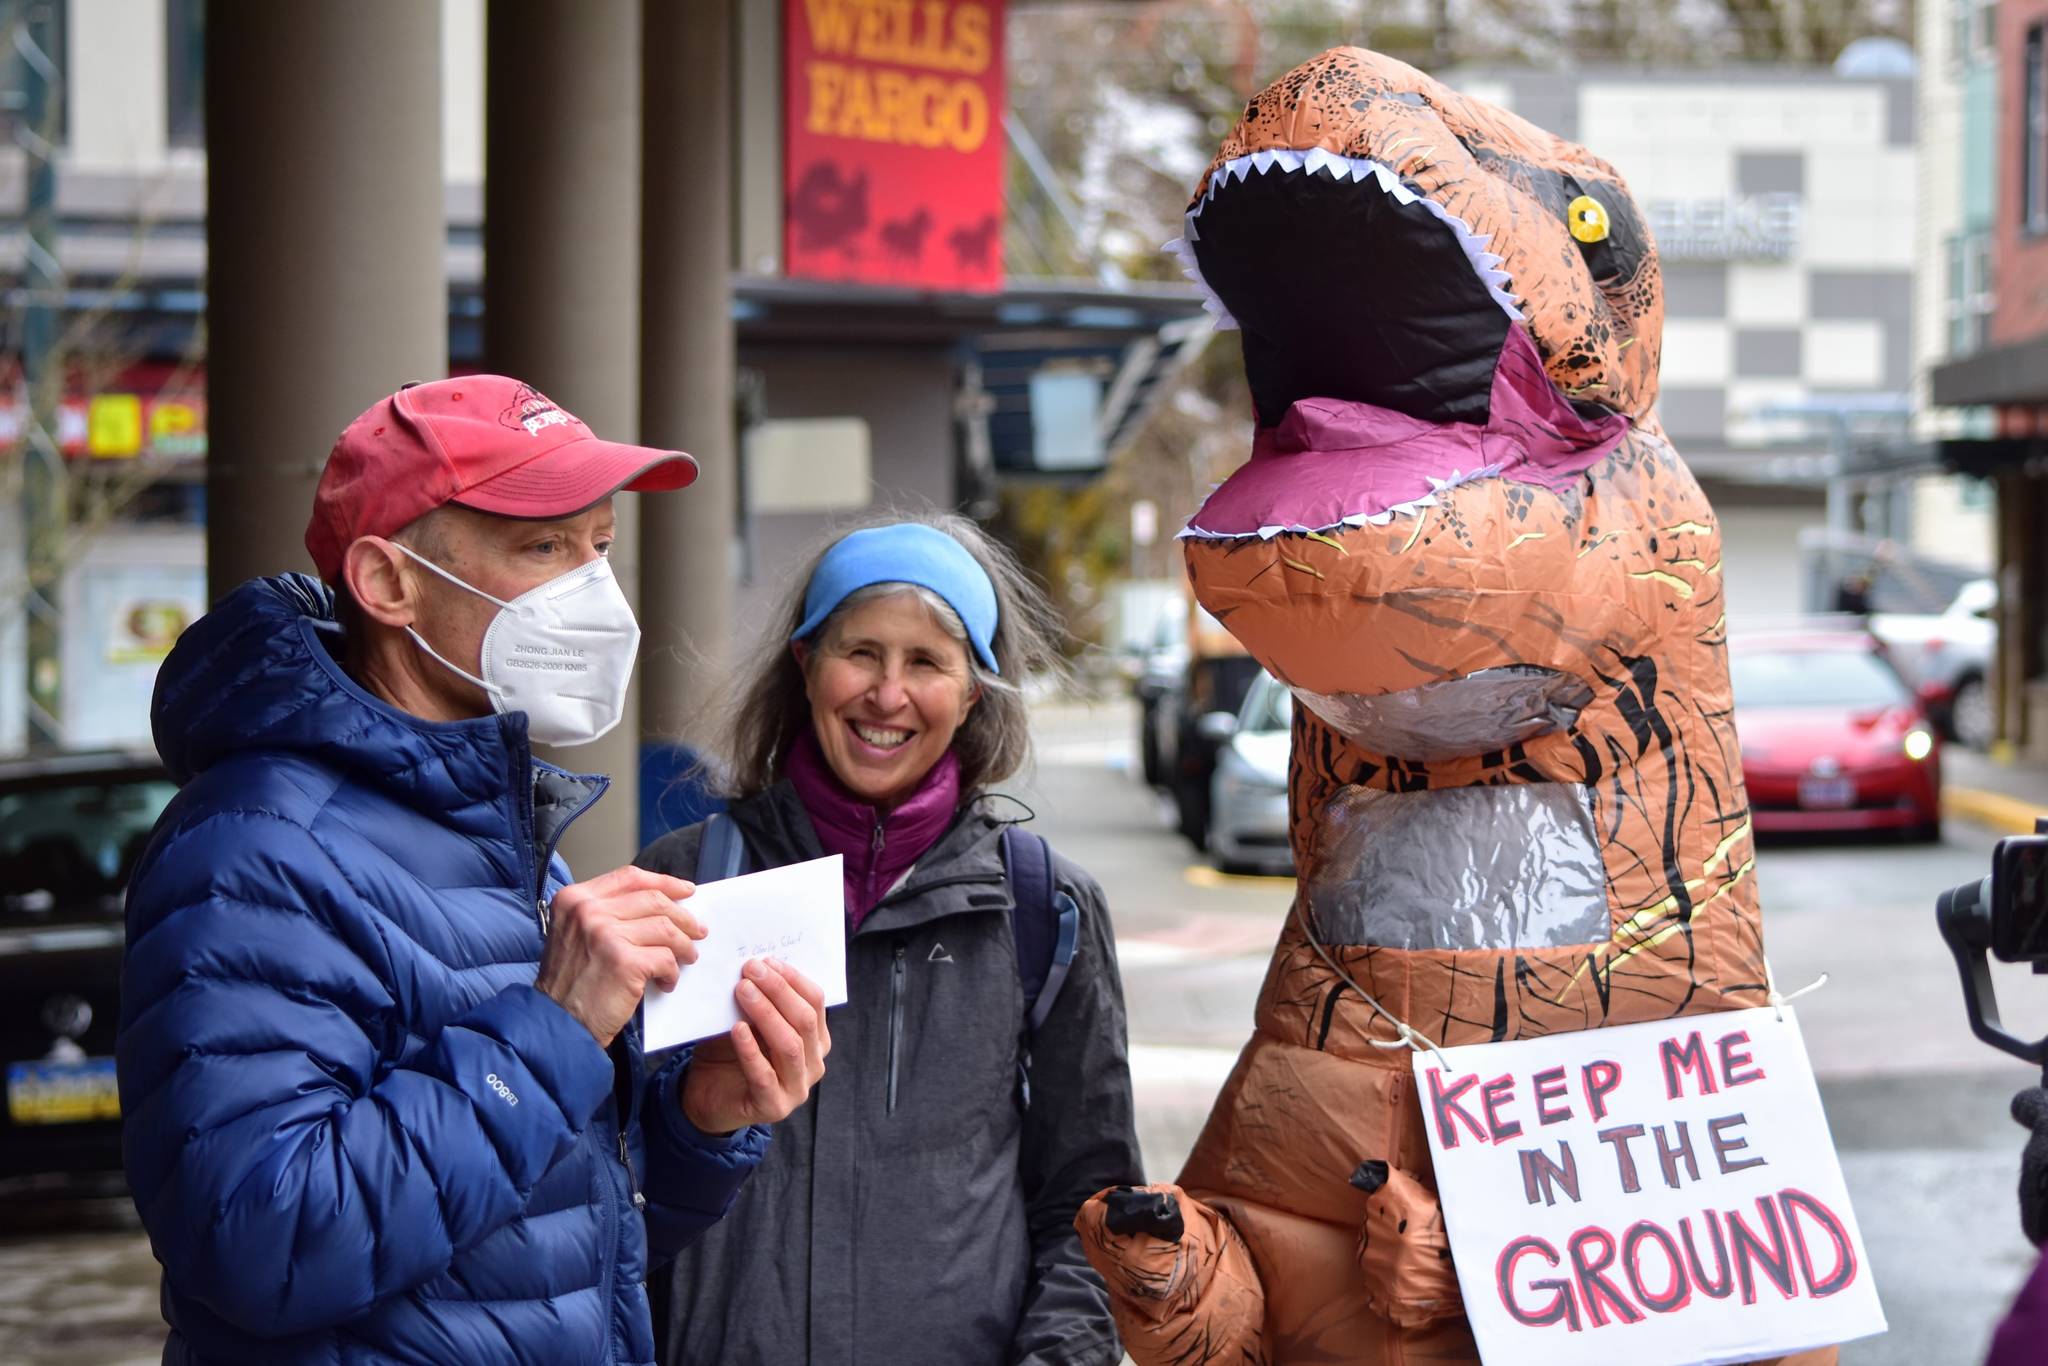 Peter Segall / Juneau Empire
Doug Woodby, co-chair of environmental group 350Juneau, holds up a letter addressed to the CEO of Wells Fargo alongside Irene Alexakos and Dick Farnell, wearing the costume. The group delivered the letter urging divestment from the fossil fuel industry to the bank’s branch in downtown Juneau on Friday, April 2, 2021.